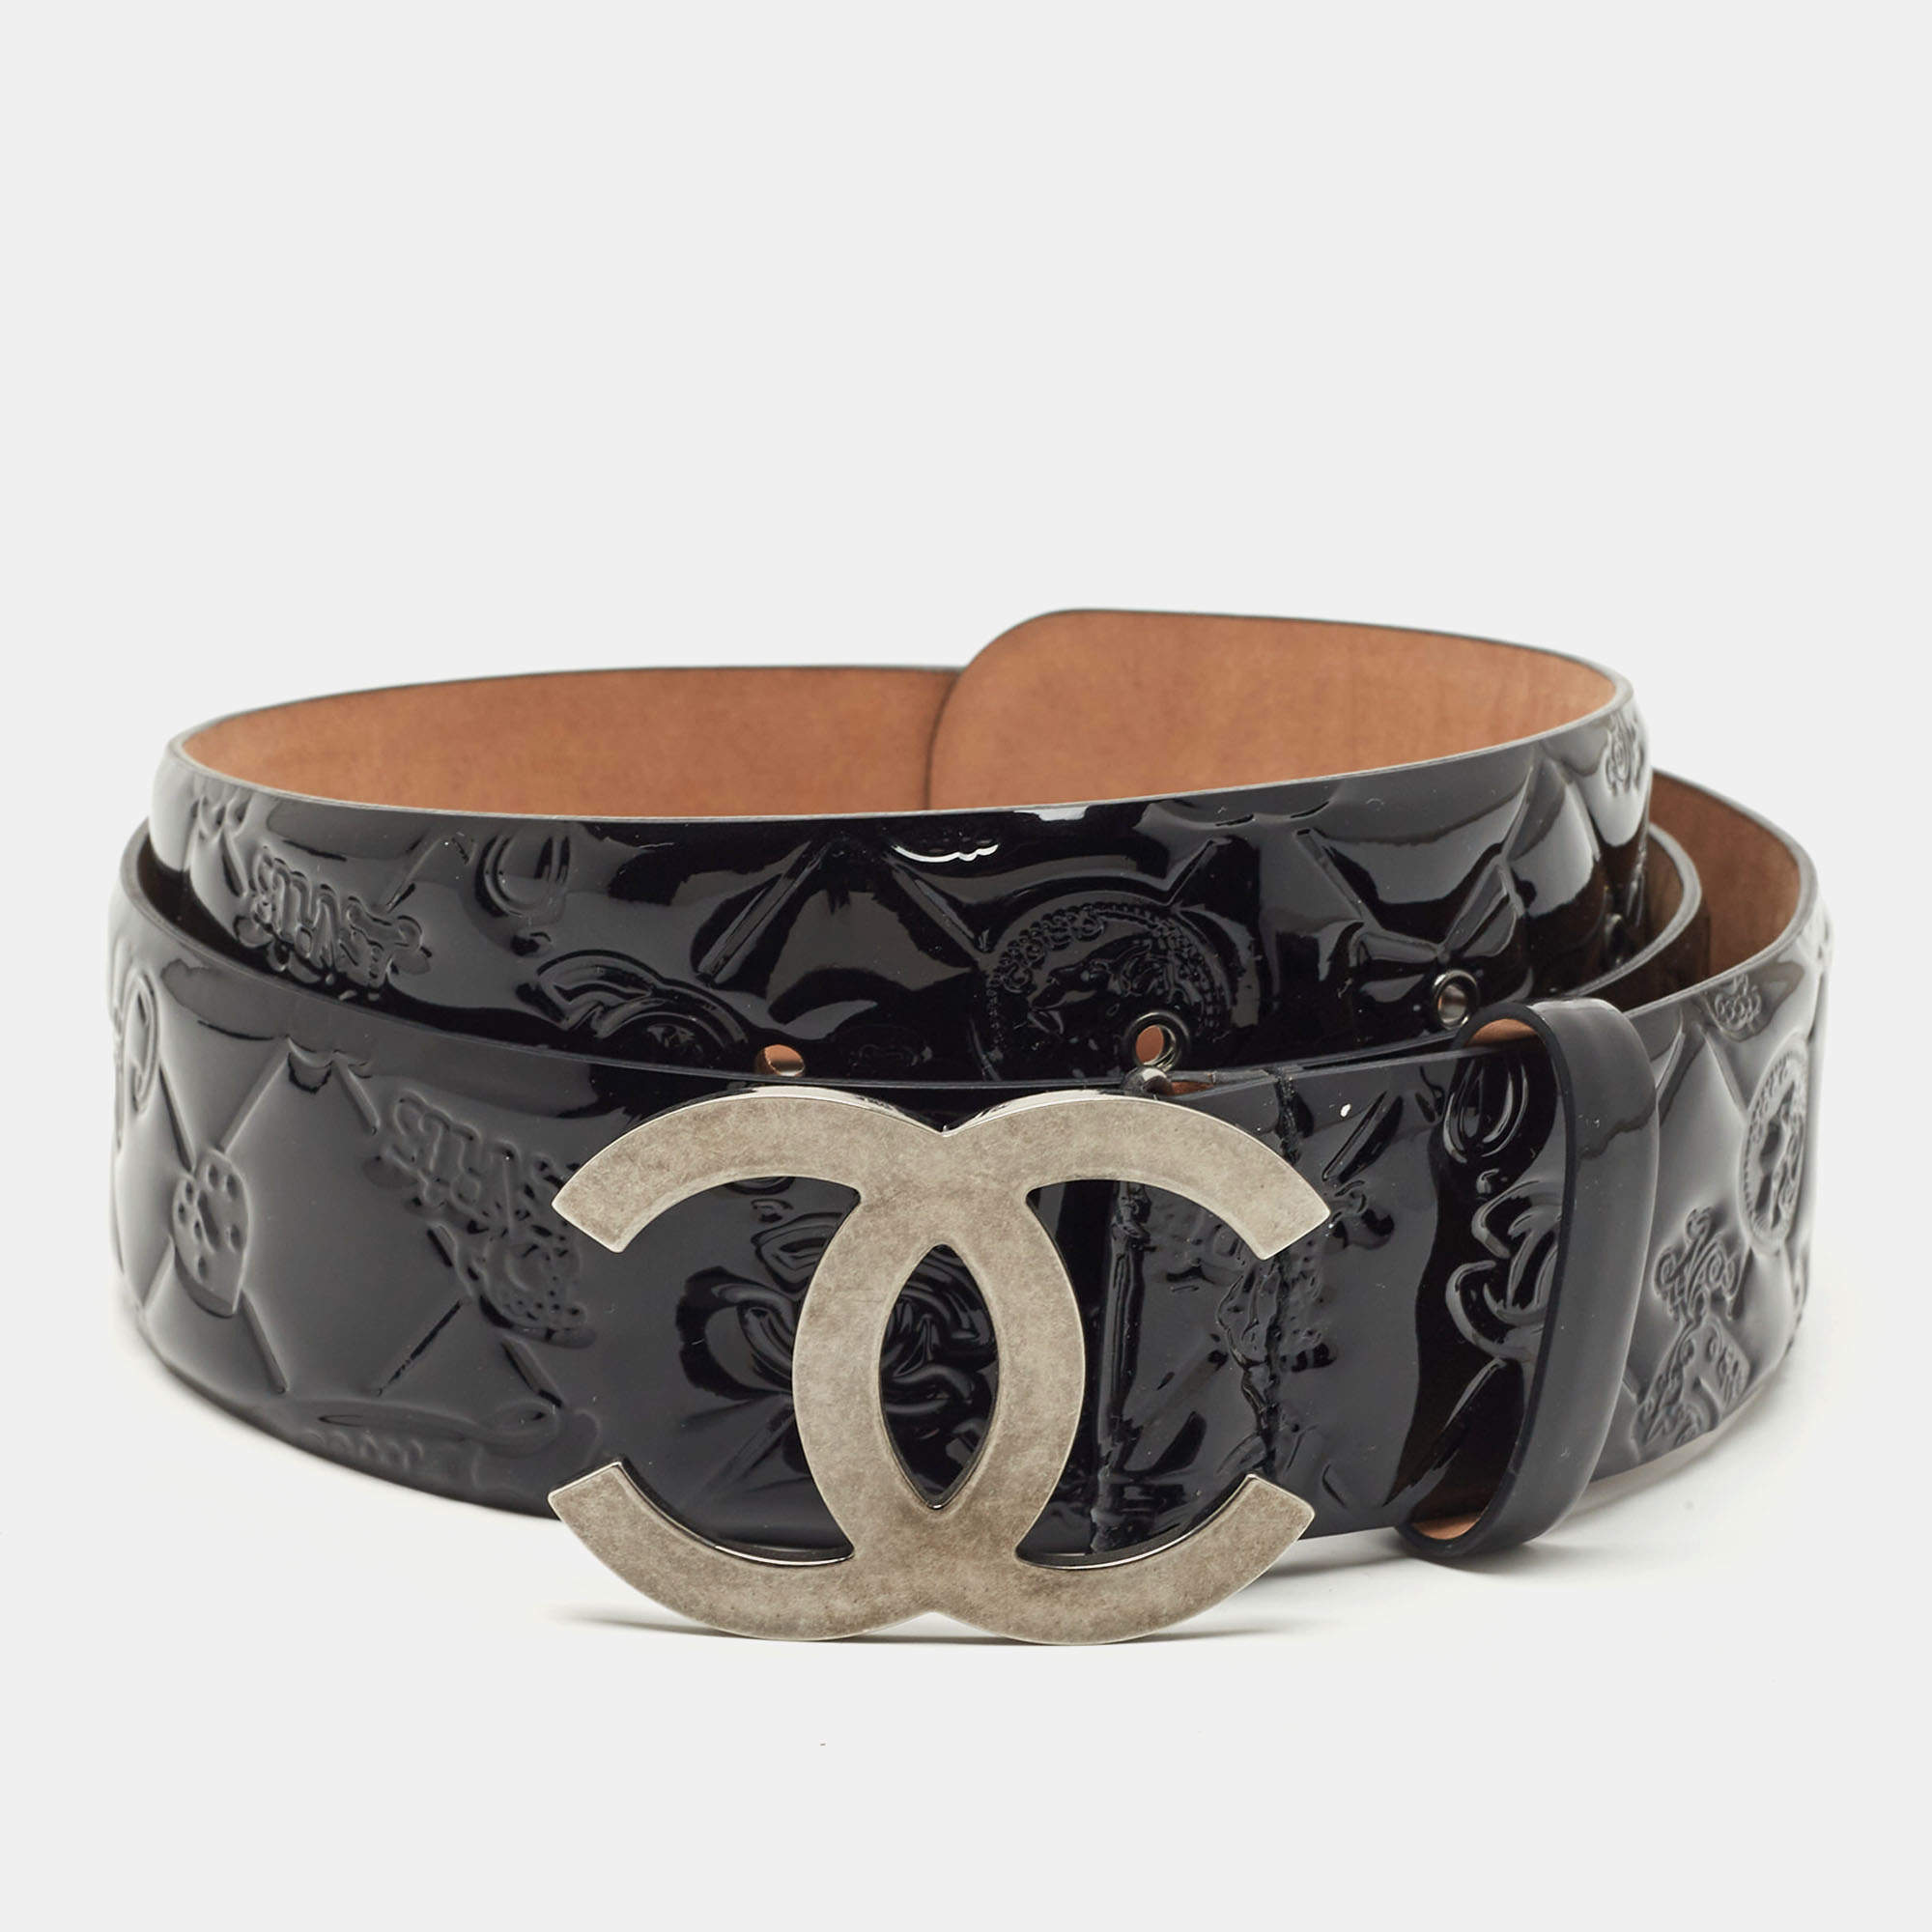 Chanel Black Quilted Embossed Patent Leather CC Buckle Belt 95 CM